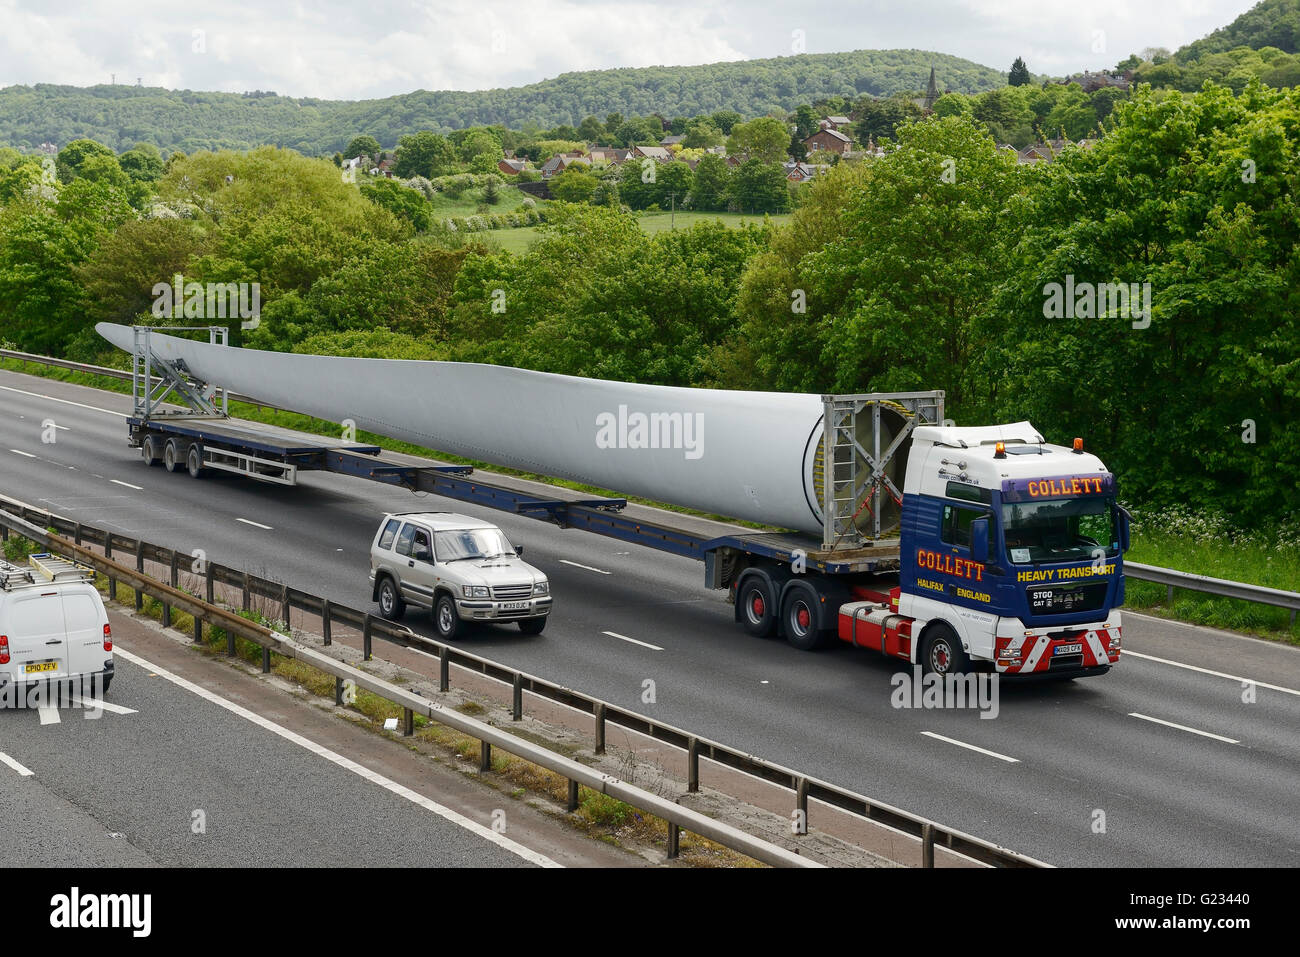 Helsby, Cheshire, UK. 23rd May 2016. A 45 metre long wind turbine blade being transported under police escort. The vehicle has travelled from the Port of Liverpool and is approaching junction 14 of the M56 motorway where it will exit to the Frodsham Wind Farm project currently under construction. Andrew Paterson/Alamy Live News Stock Photo